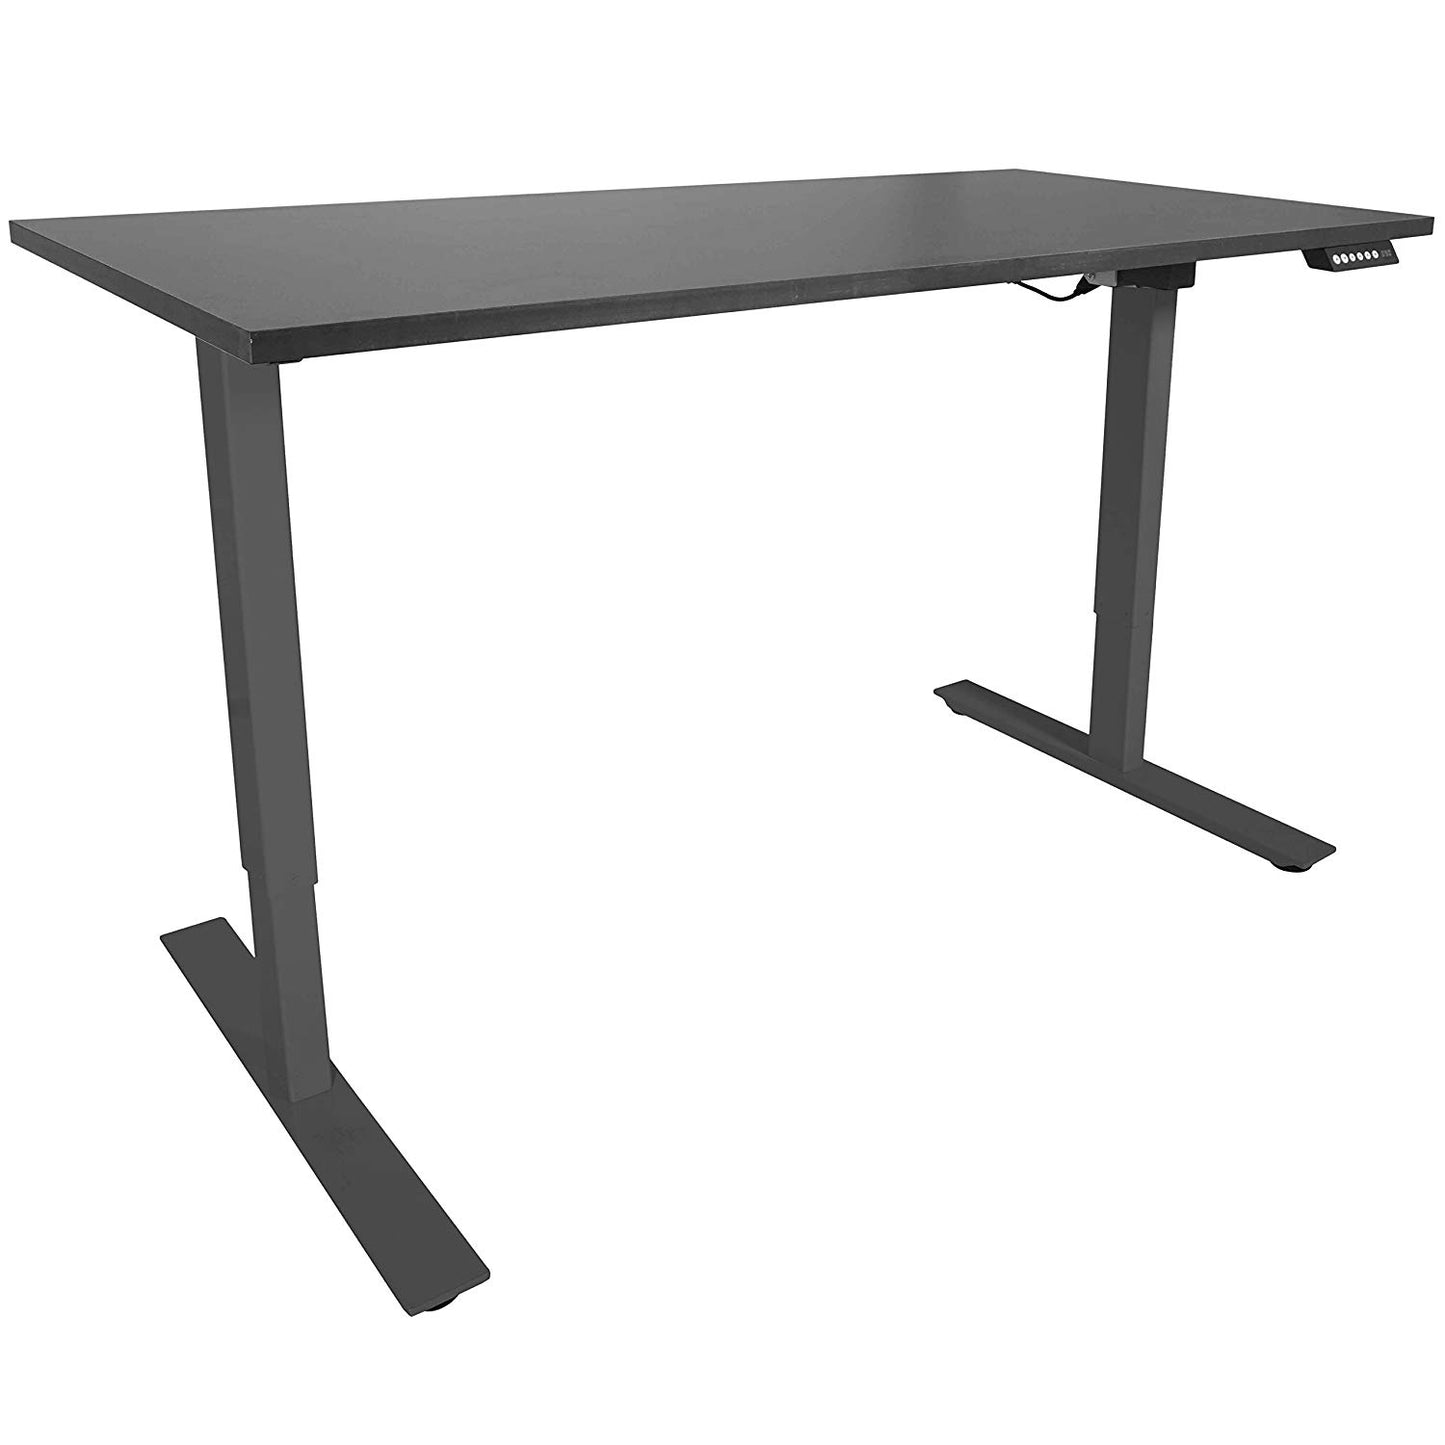 A2 Black Adjustable Sit To Stand Desk  - view 1